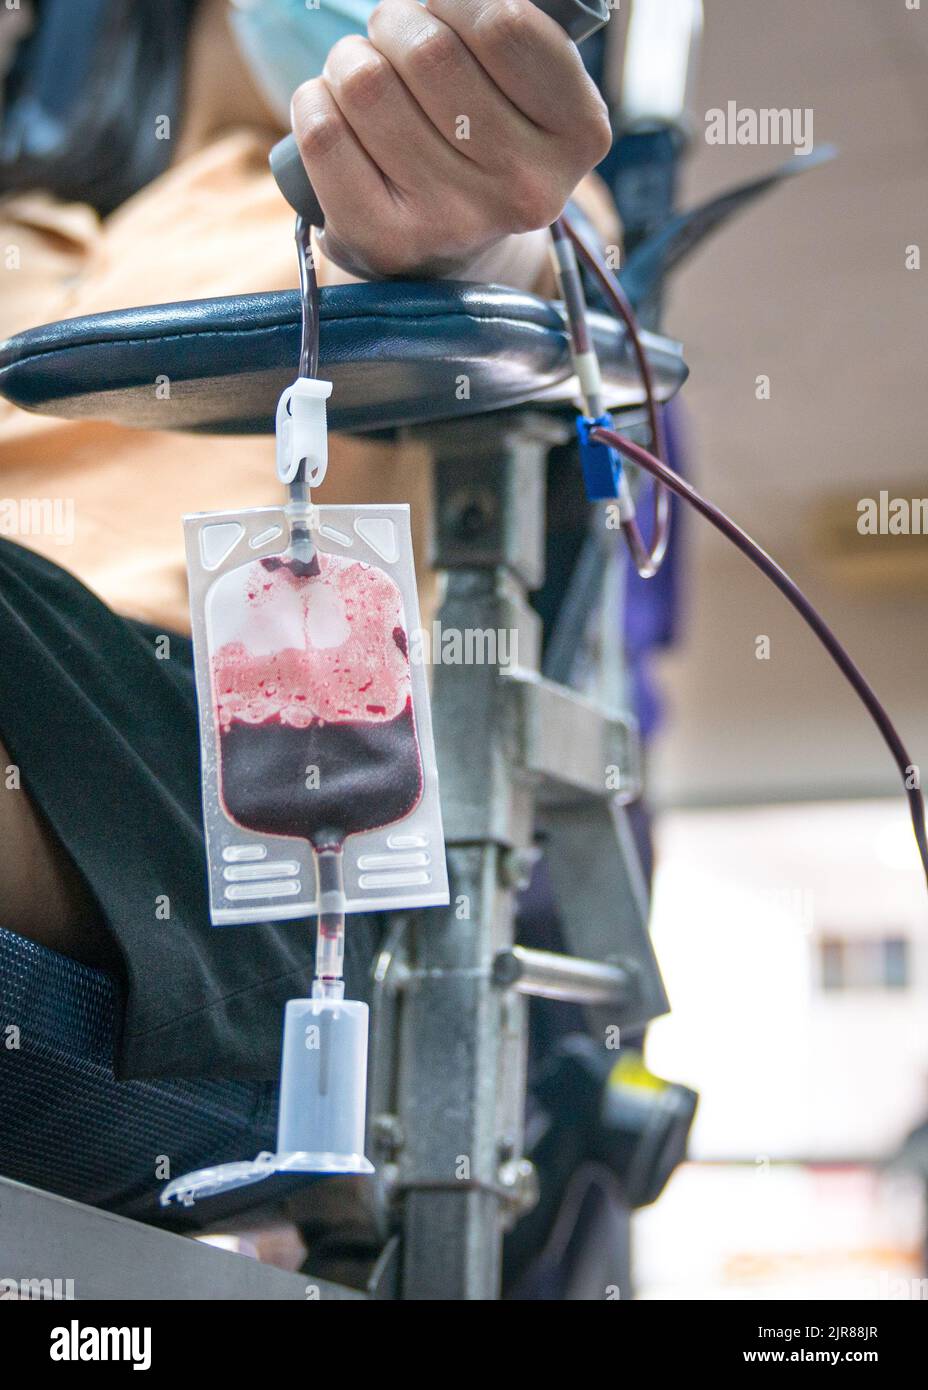 Blood donor in the midst of donating blood, close up shot. Stock Photo